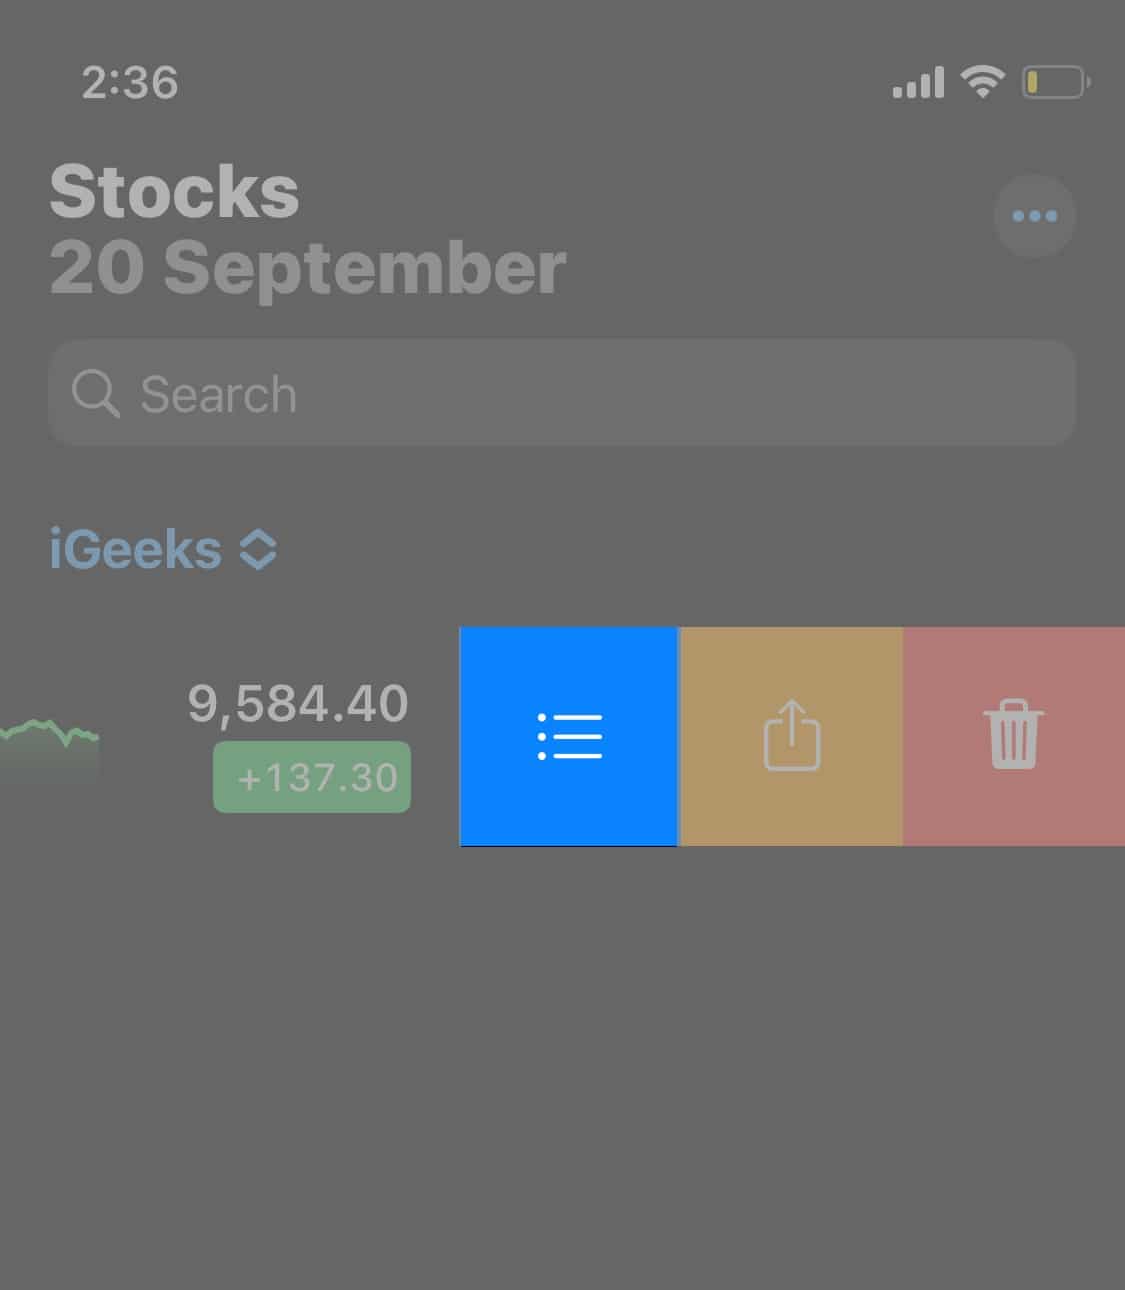 Reordering stocks in Stocks app on an iPhone